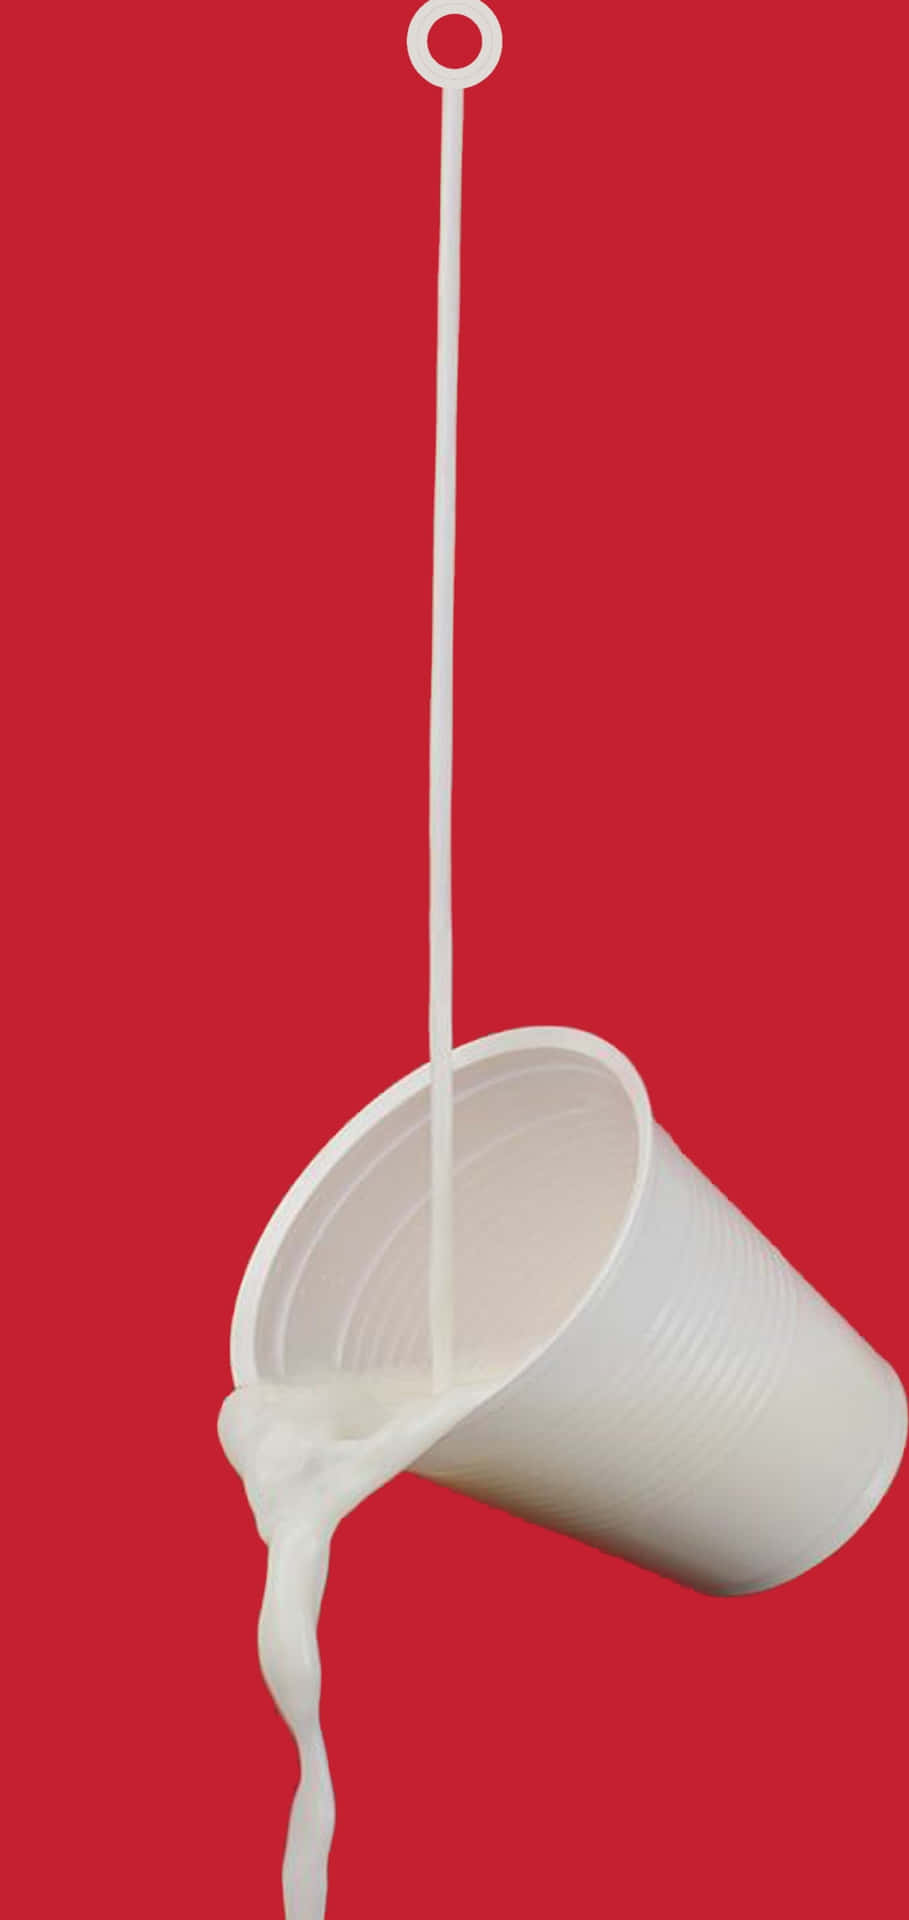 A Cup Of Milk Is Dripping From A Red Background Wallpaper